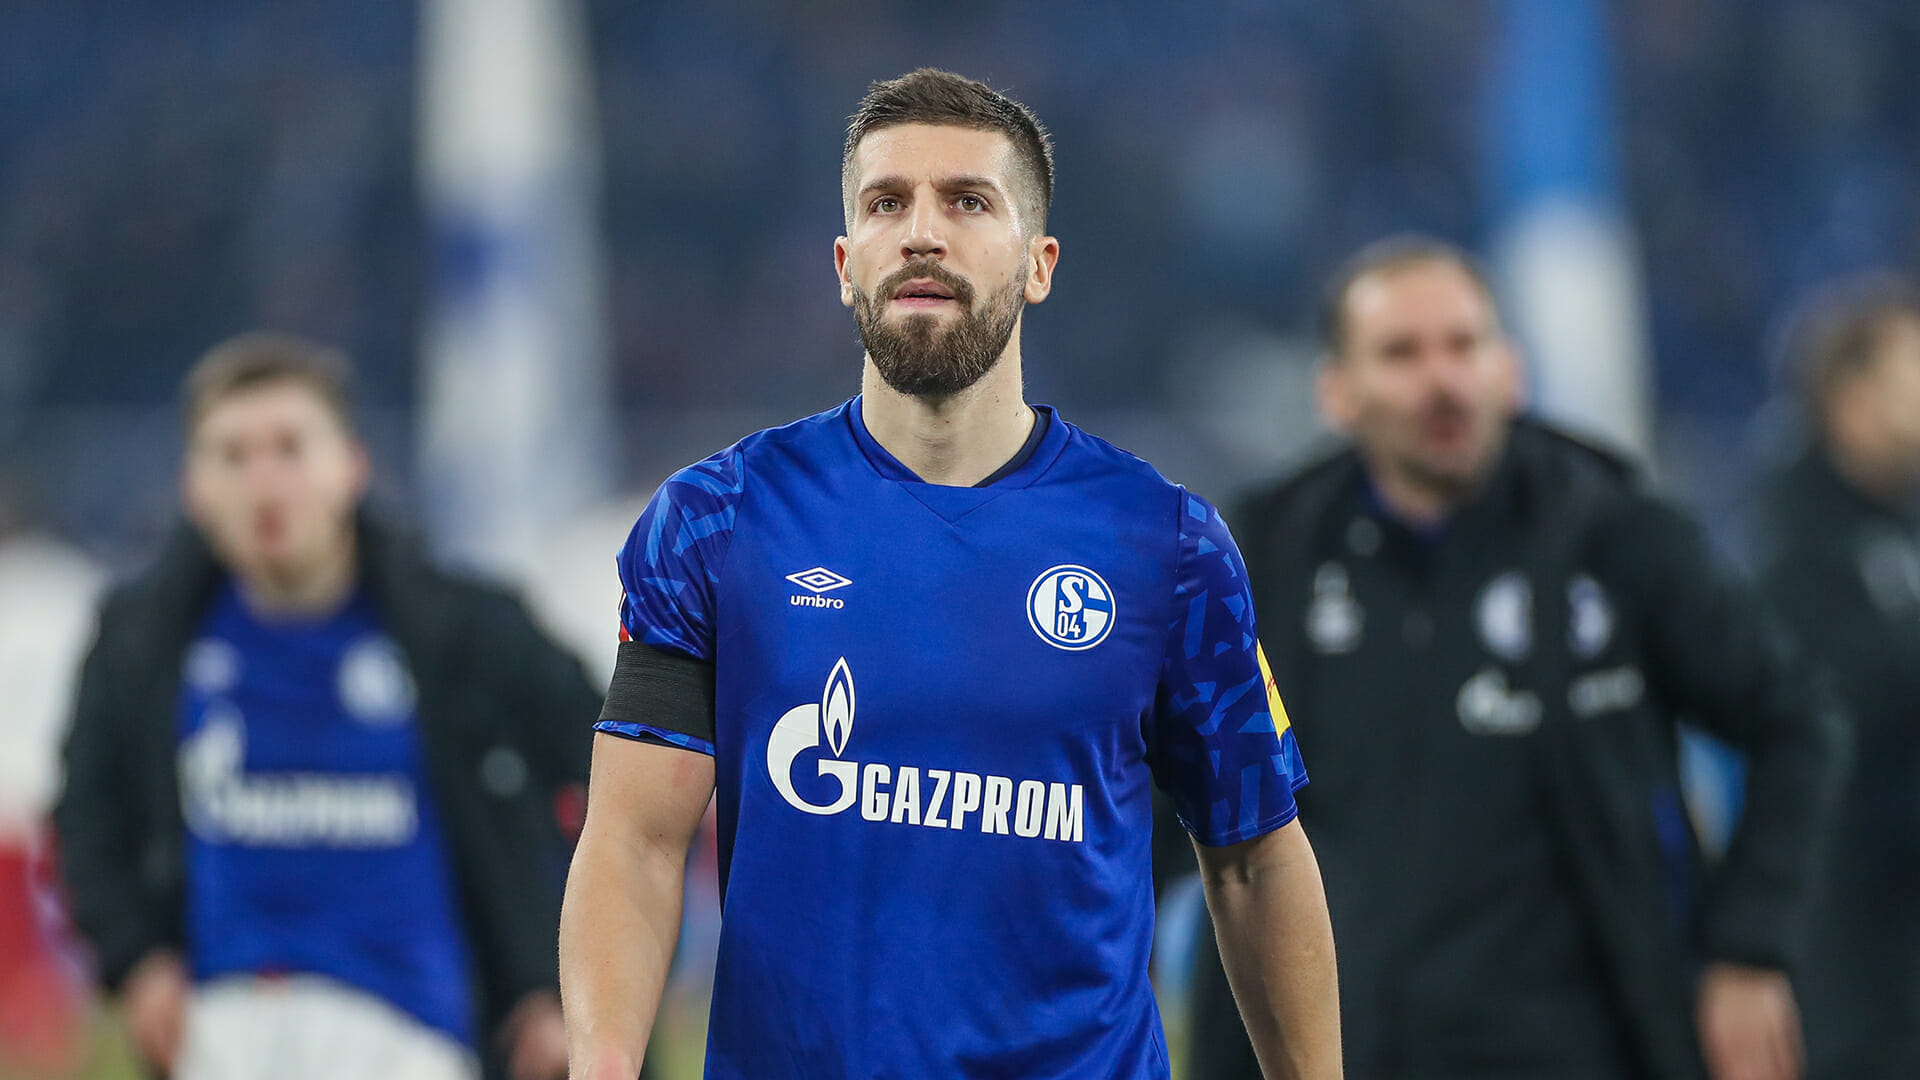 Milan are considering a move for Schalke 04 defender Matija Nastasic as, despite the clean sheet on Monday, they seem to have few center back options